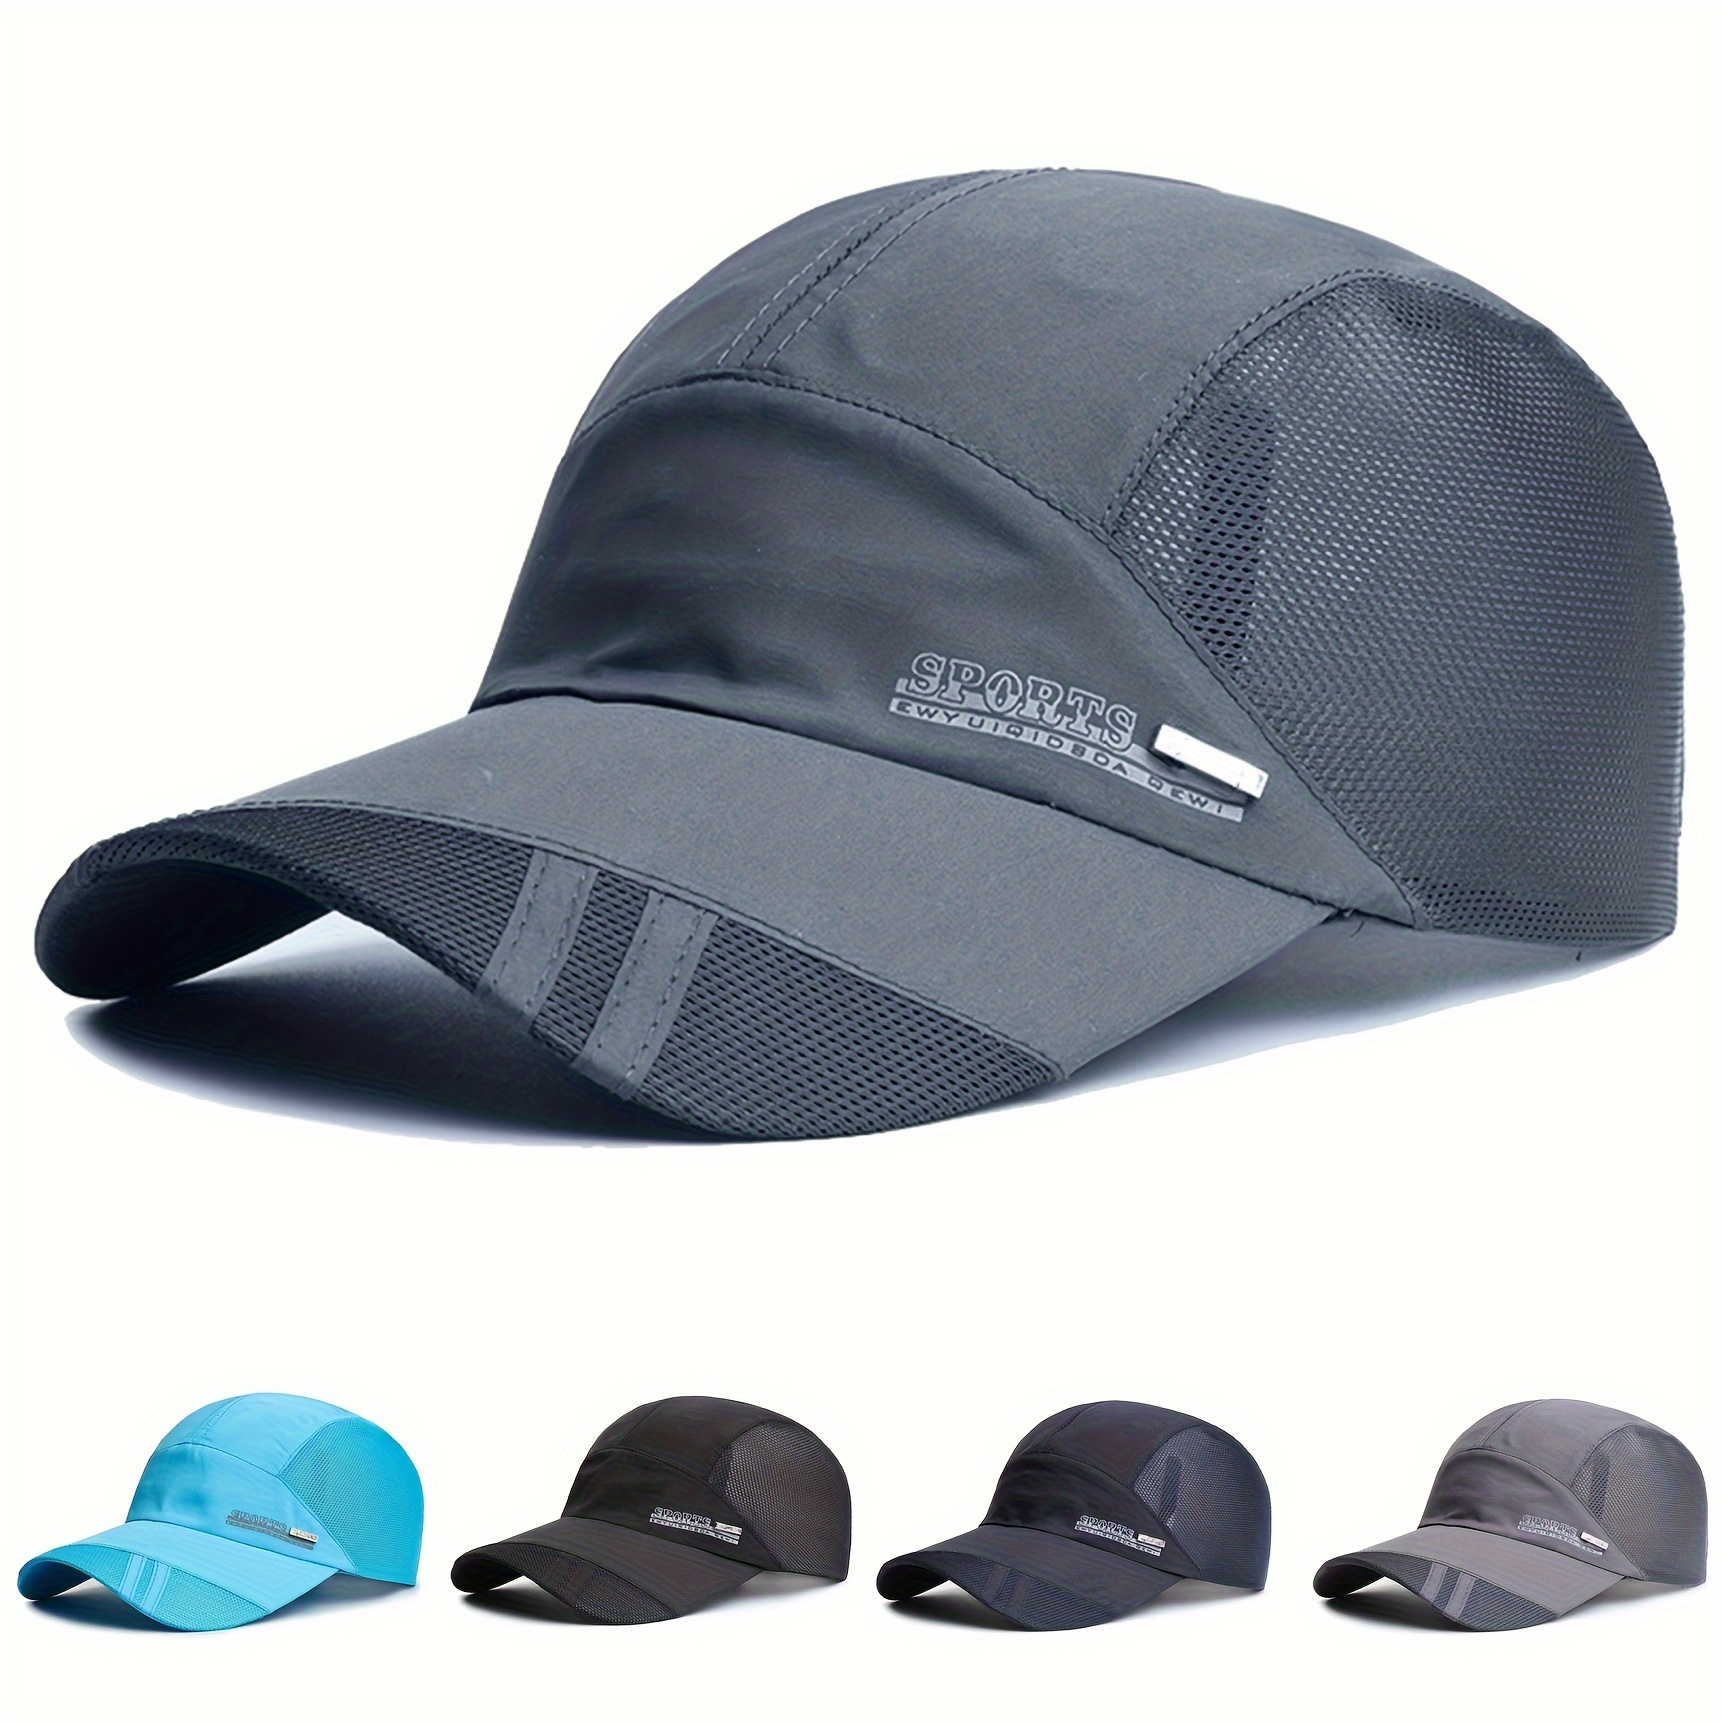 

Men's Breathable Outdoor Fishing Sunscreen Baseball Cap For Spring And Summer